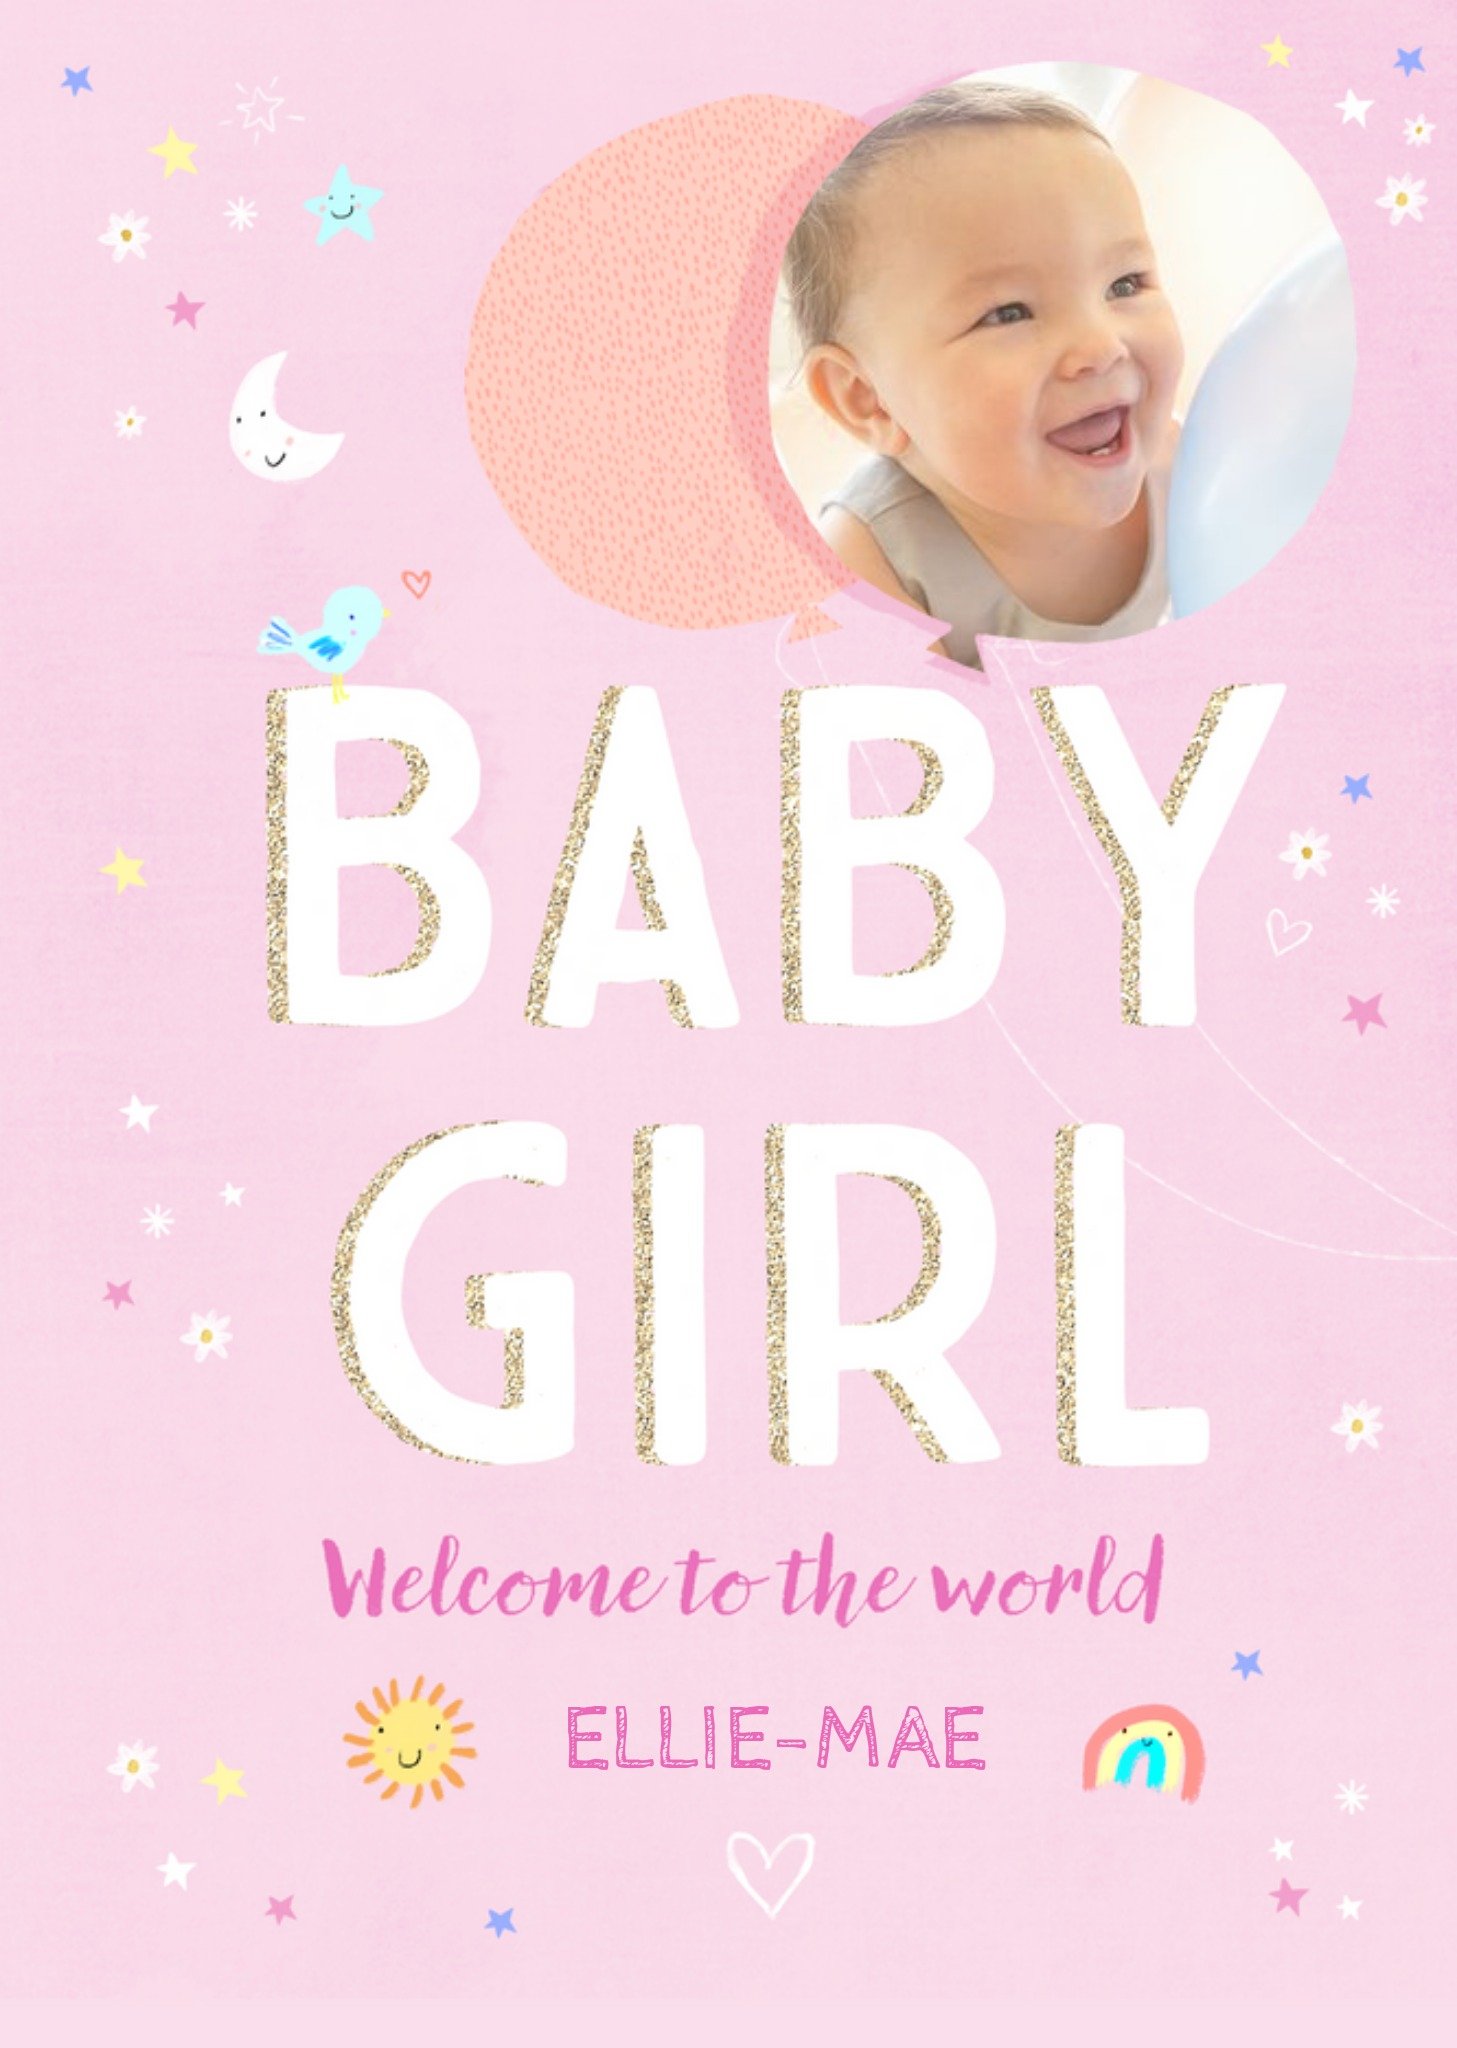 Moonpig Typographic Illustrated Welcome To The World New Baby Girl Photo Upload Card Ecard